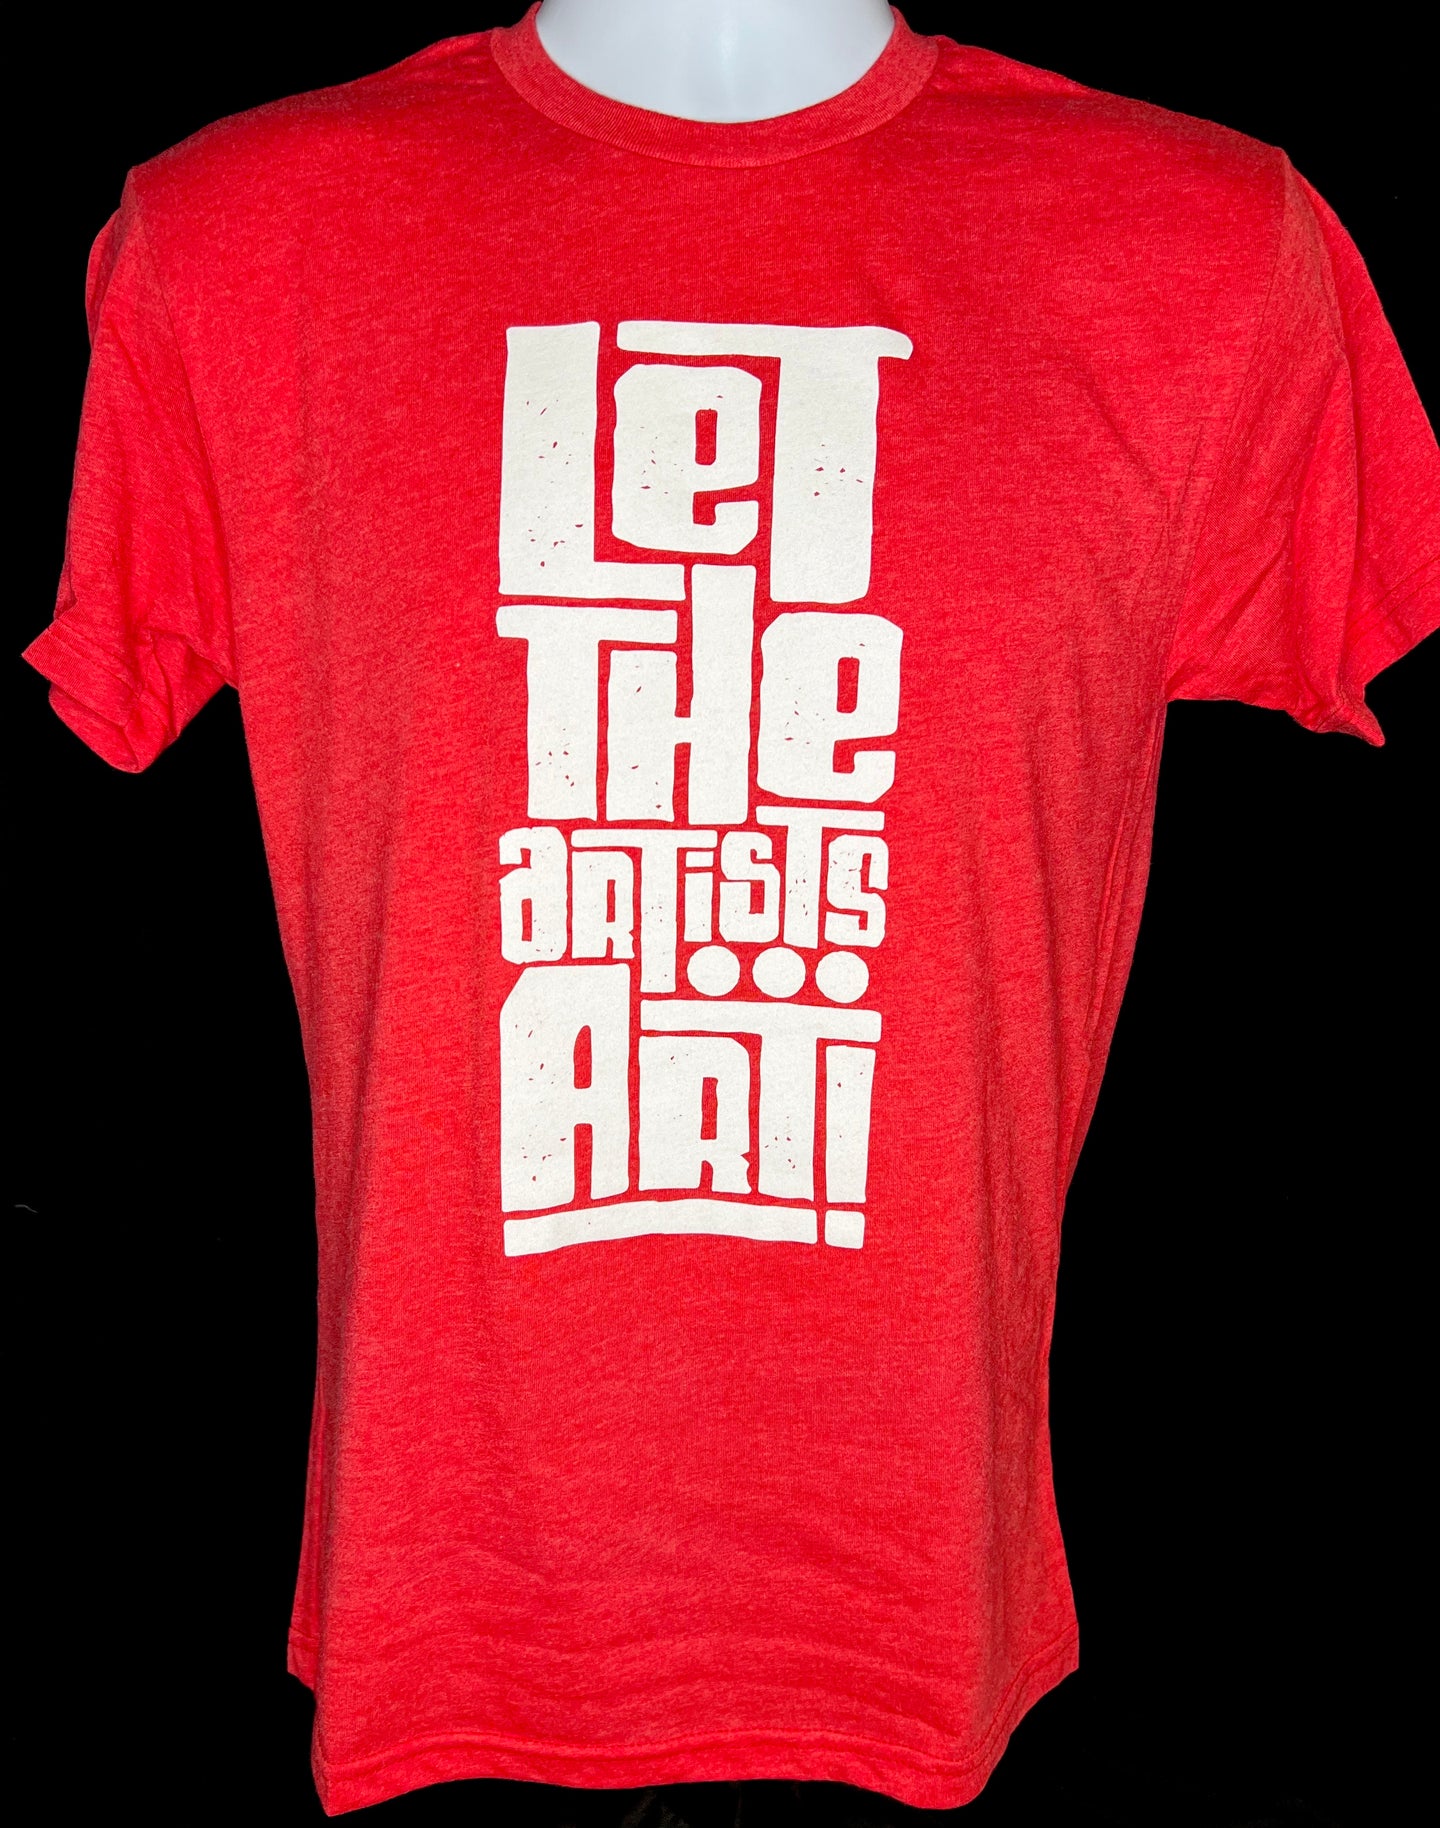 Let The Artists Art! - Red T-Shirt (Unisex)